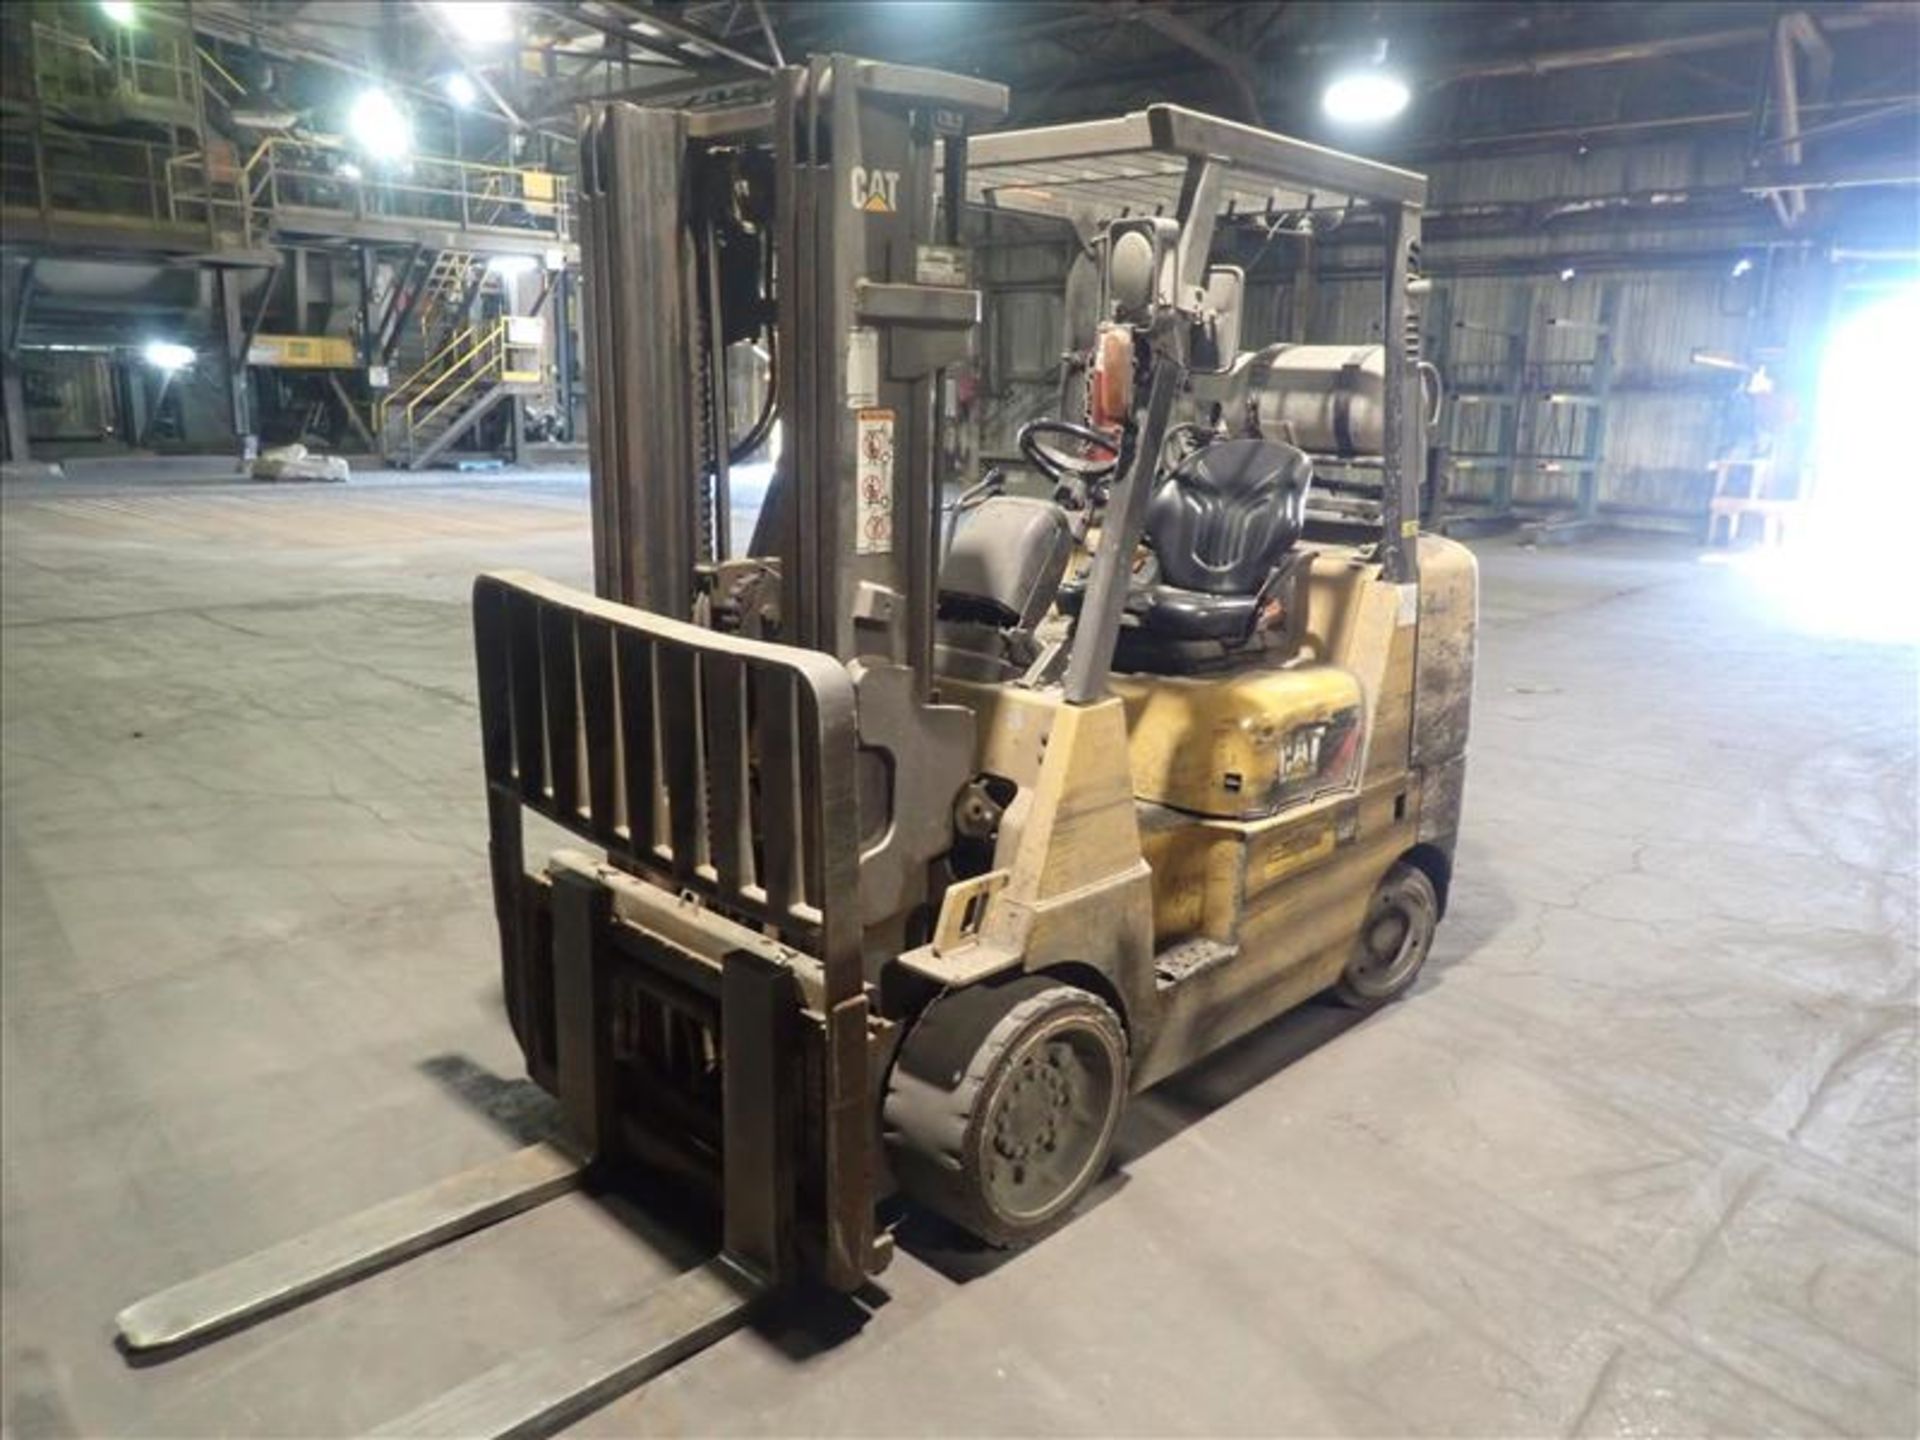 CAT forklift truck, mod. GC35K-LP, ser. no. AT87A30322, 6600 lbs cap., propane, 3-stage mast, side-